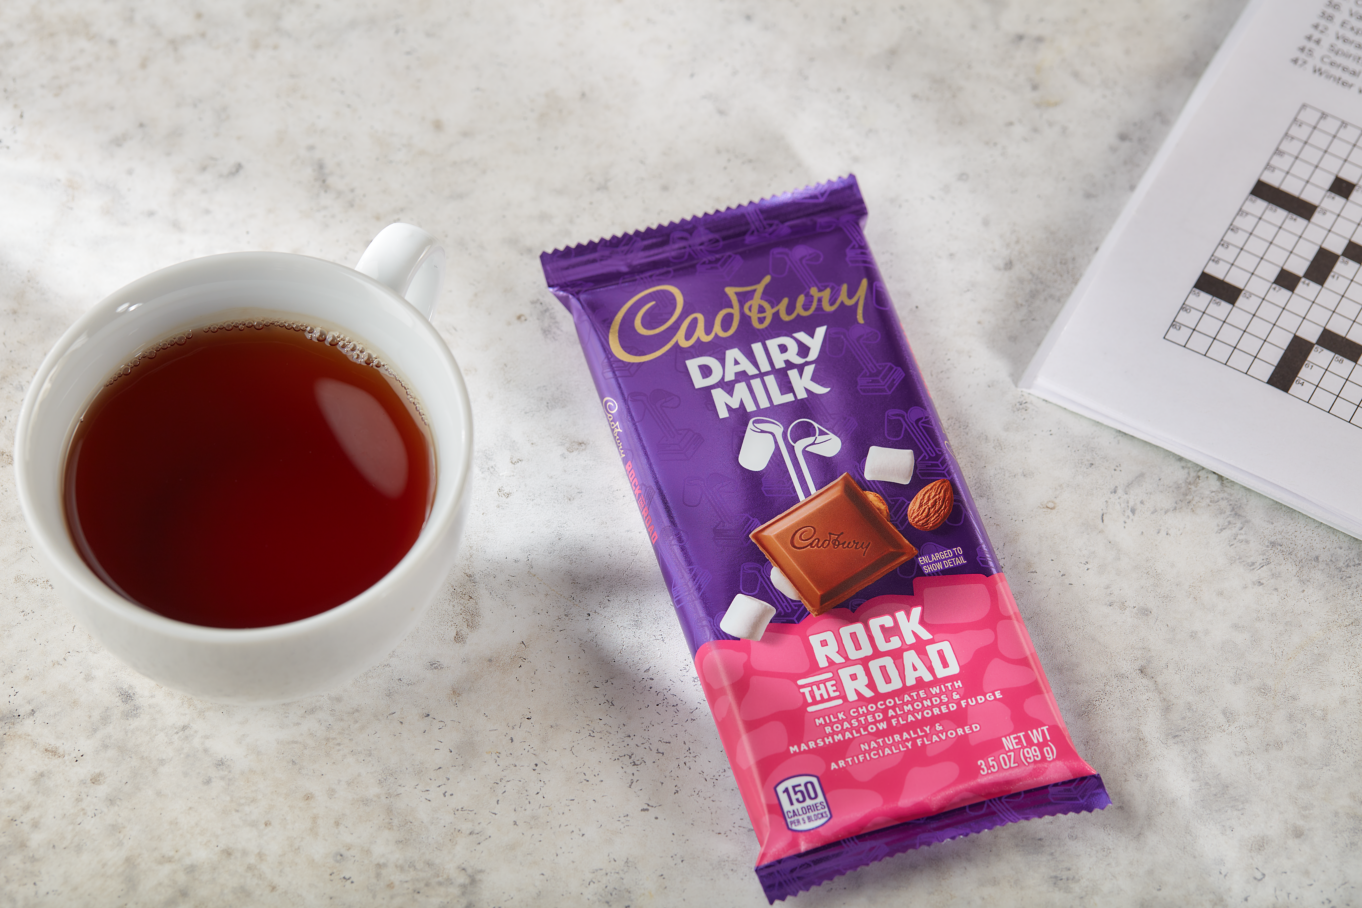 CADBURY Rock The Road Candy Bar with cup of coffee